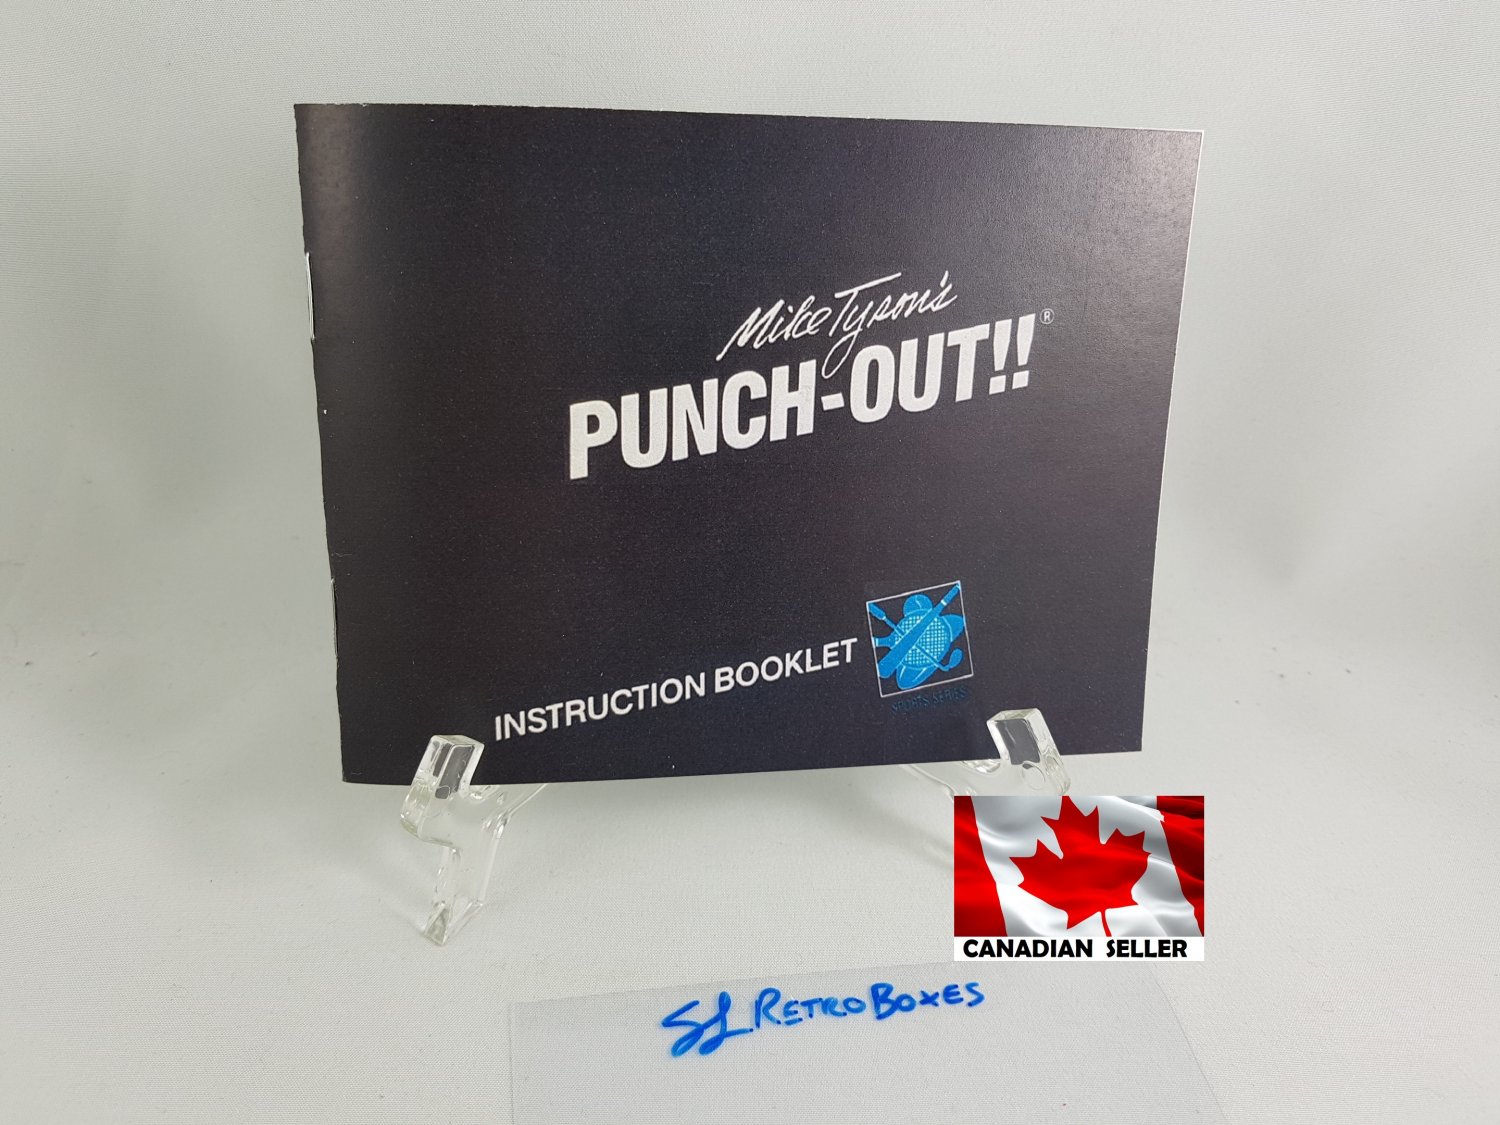 MANUAL NES - MIKE TYSON'S PUNCH OUT! - Nintendo Replacement Instruction Manual Booklet